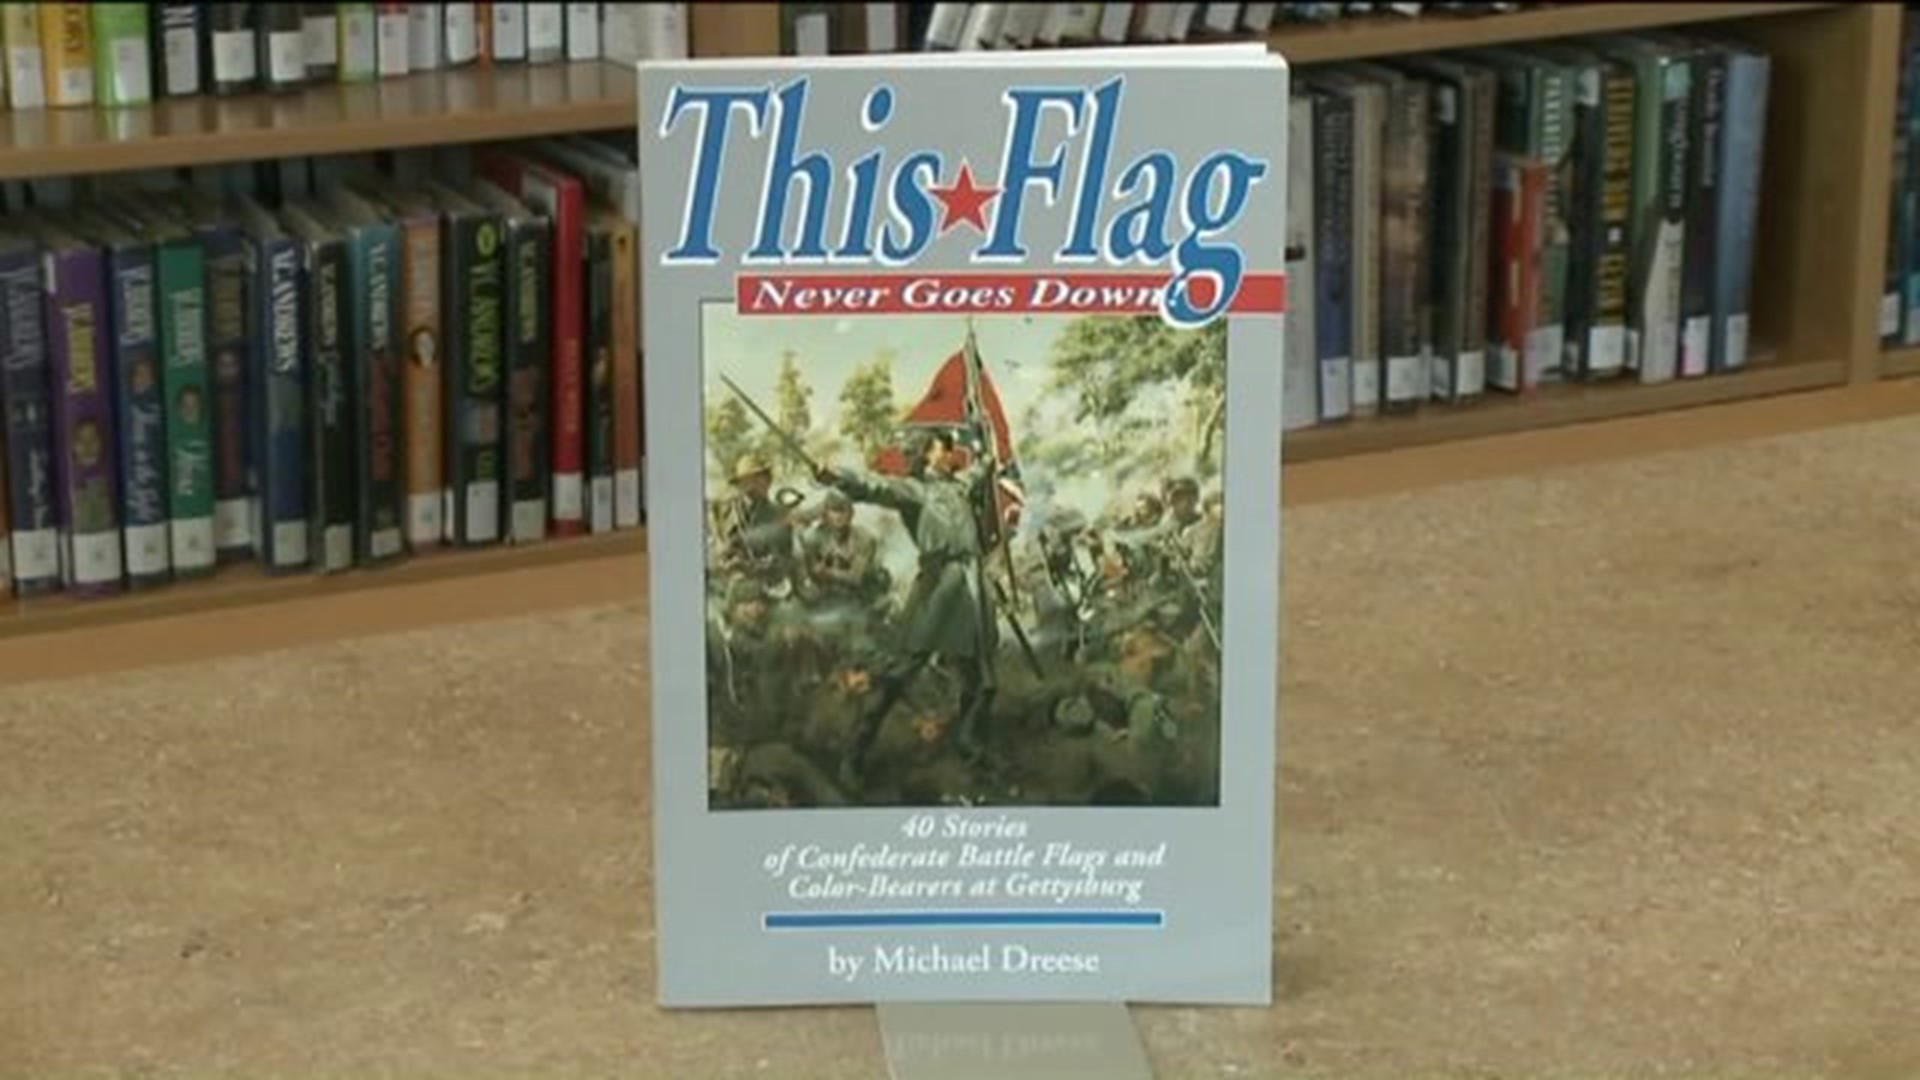 Local Author Gets Book Pulled From Amazon